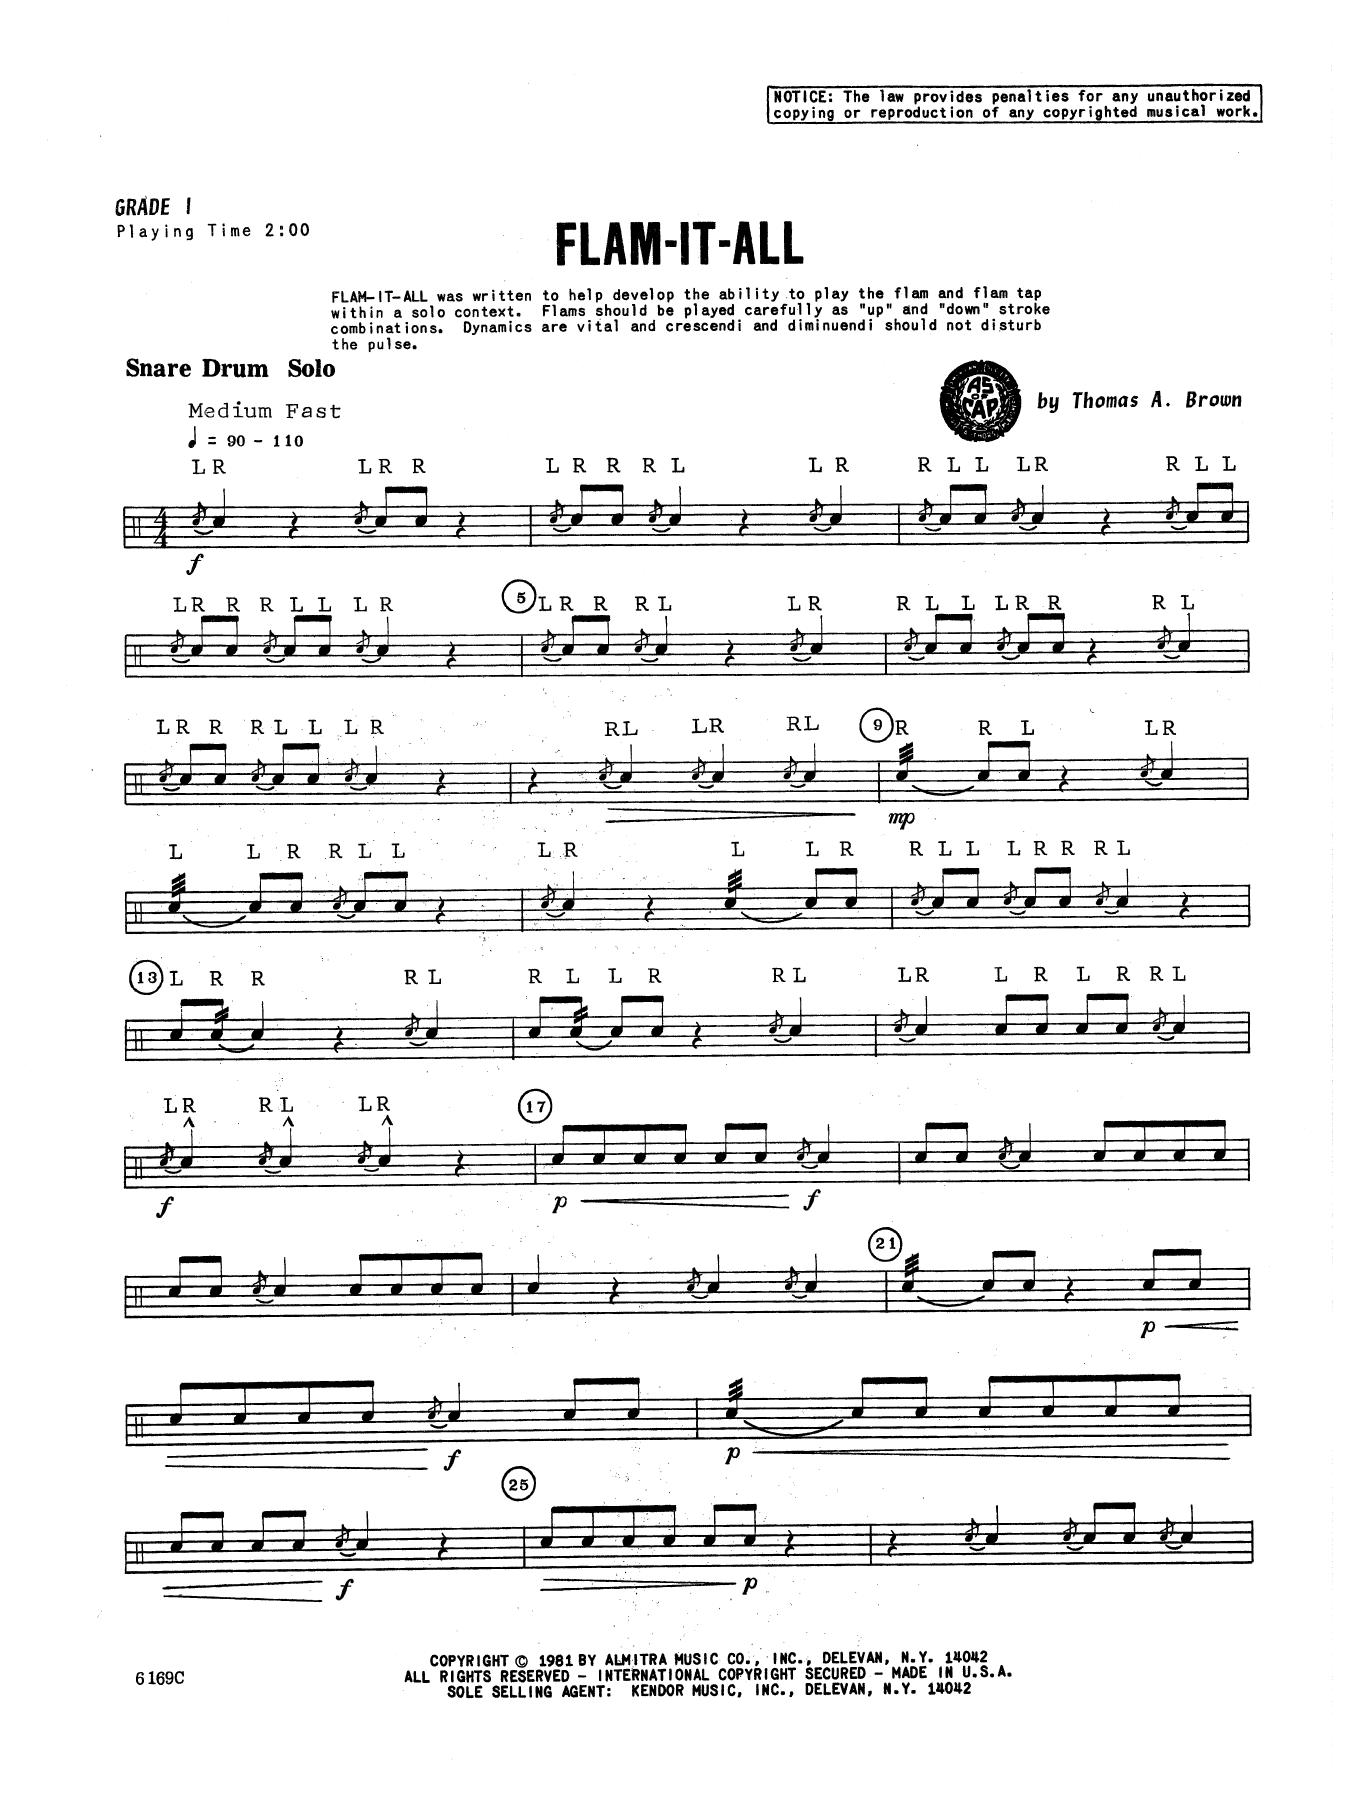 Download Tom Brown Flam-It-All Sheet Music